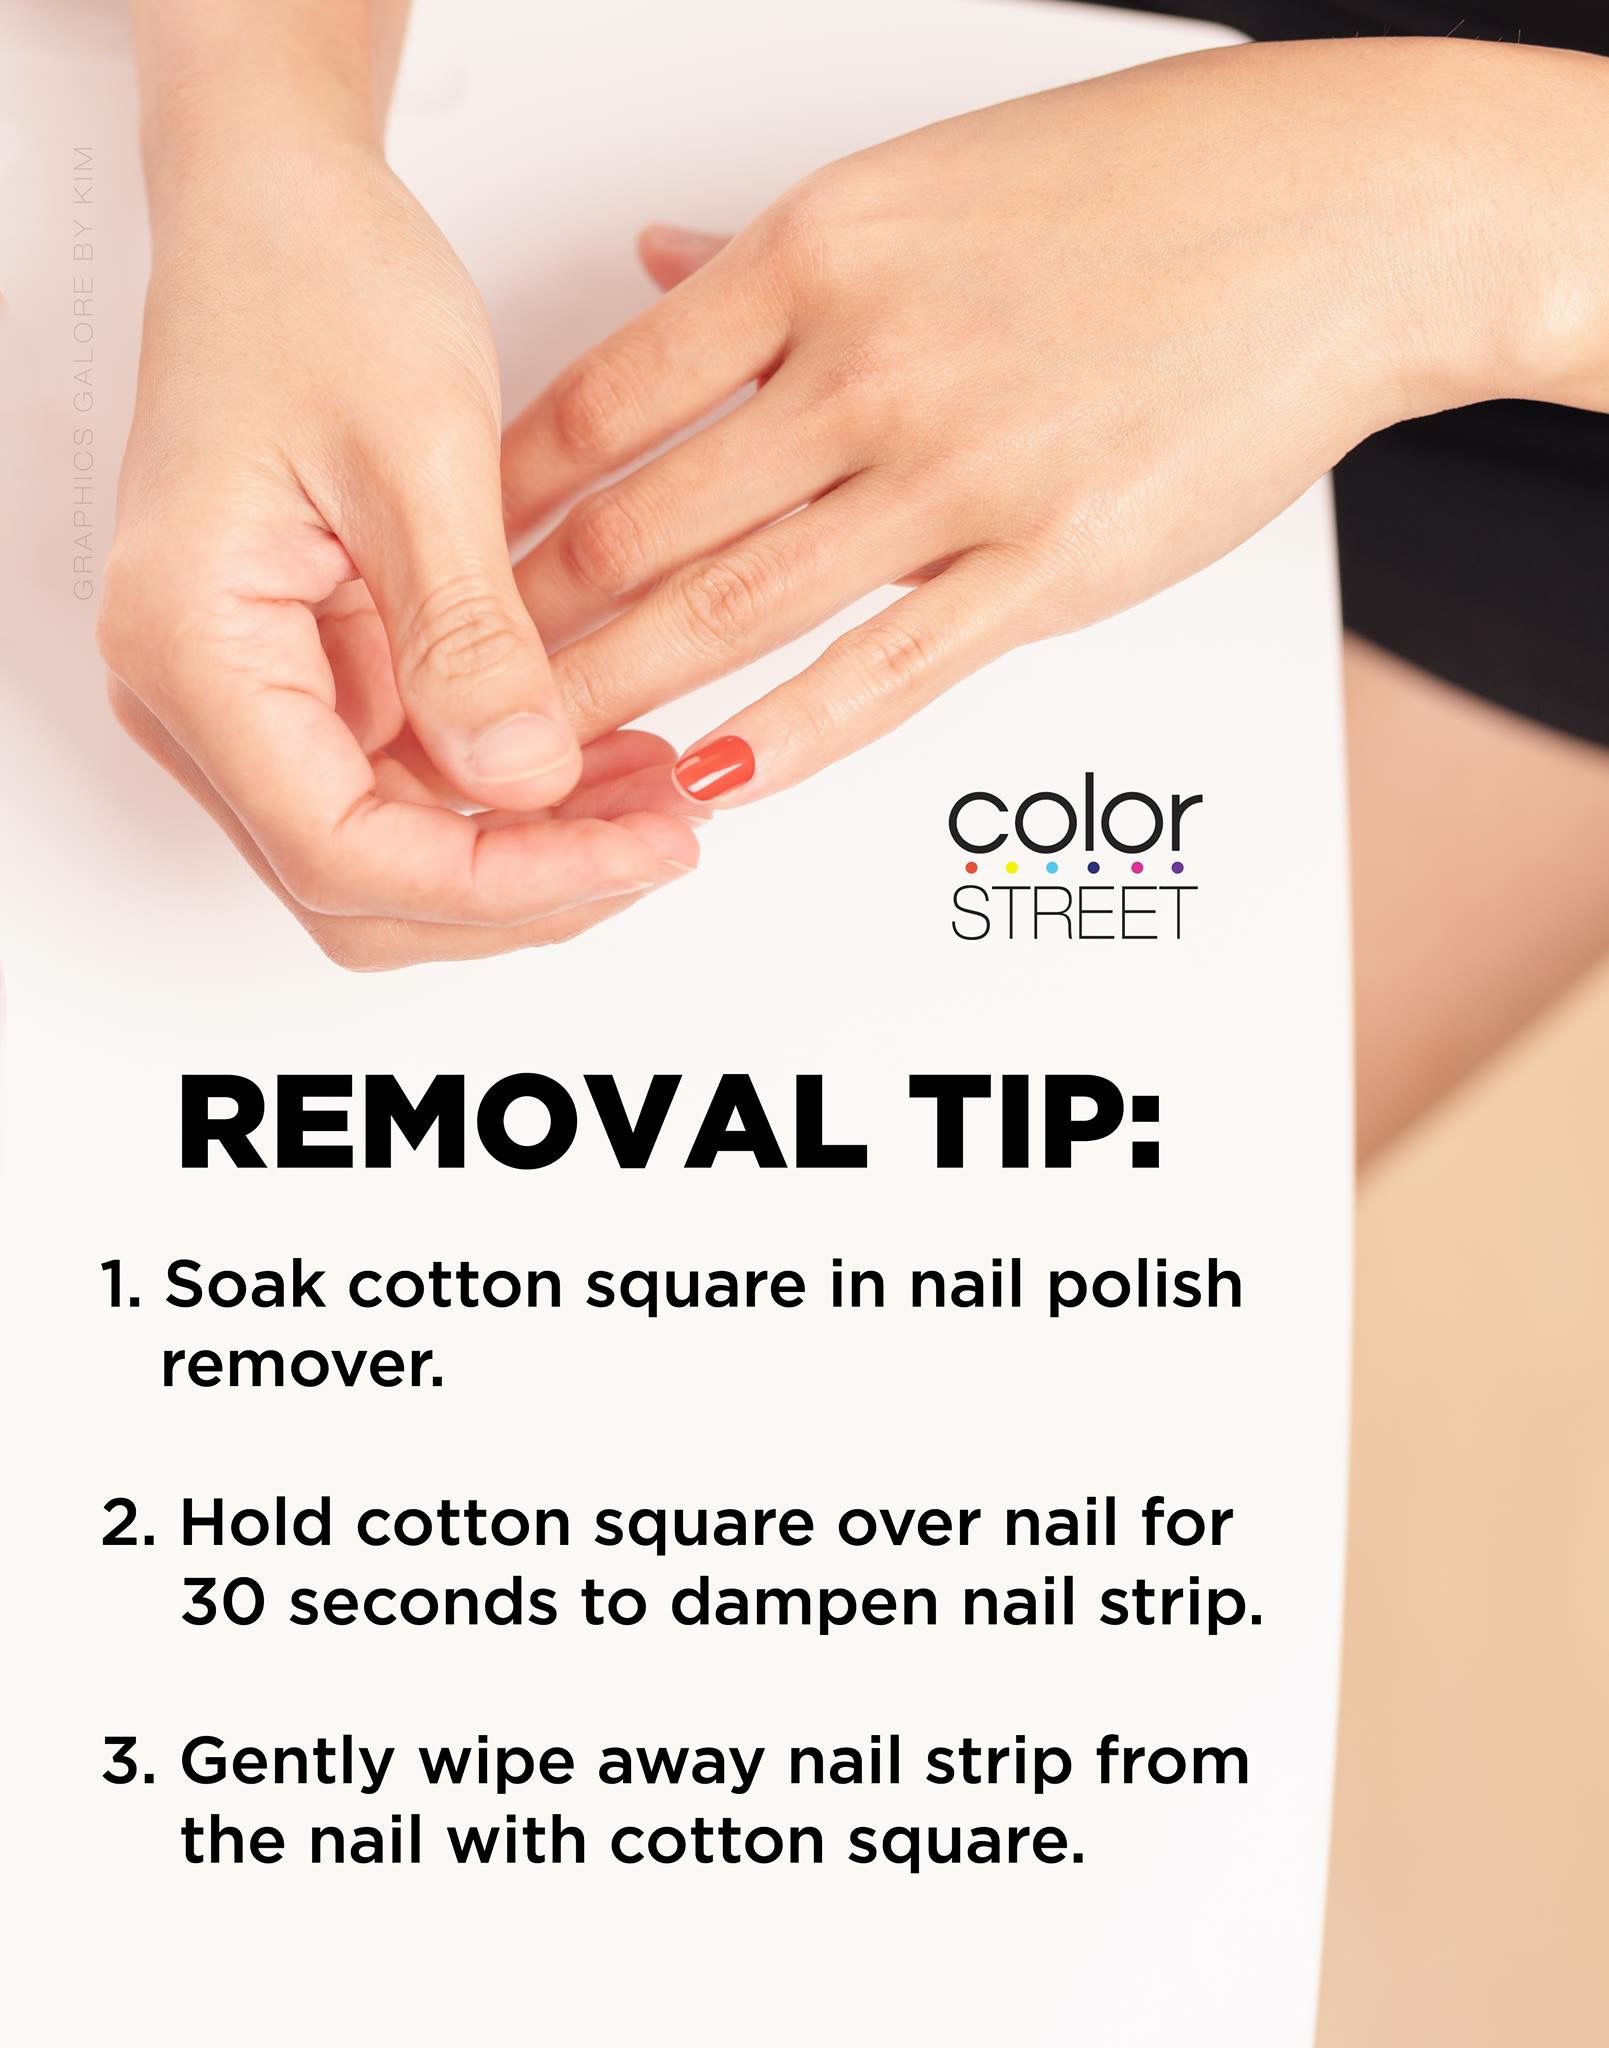 How to remove color street 100% Nail Polish Strips